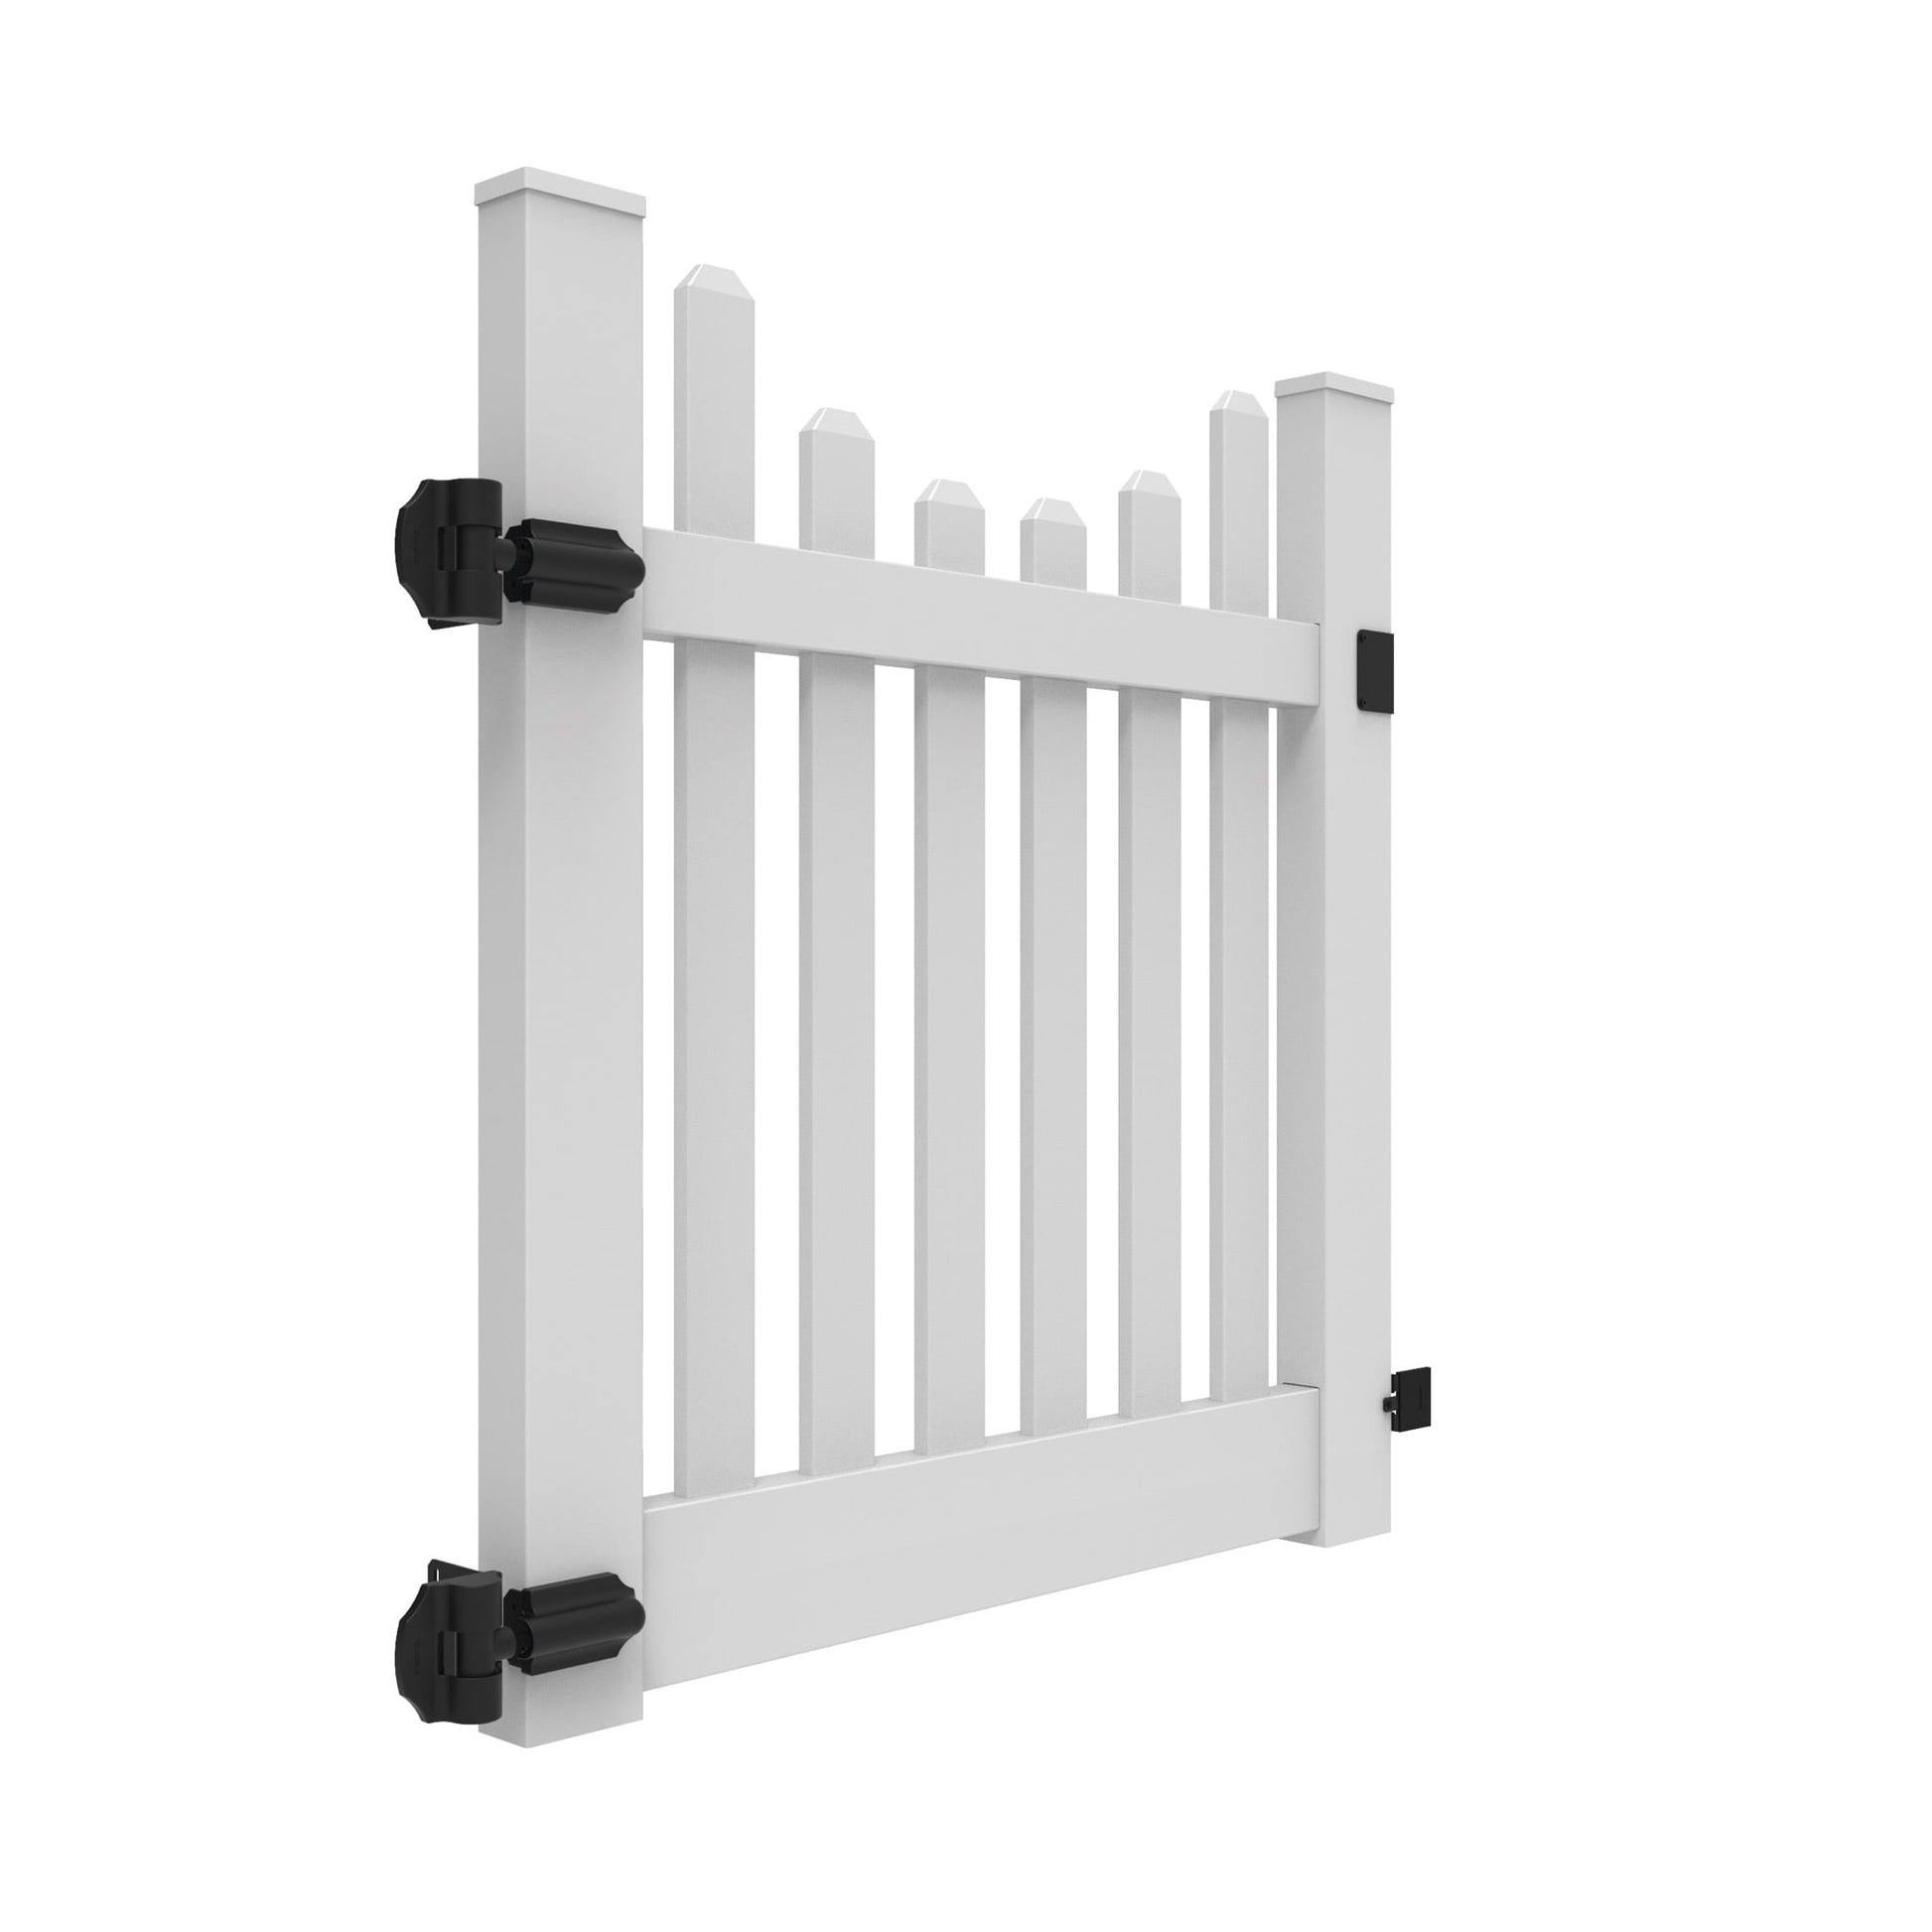 Silverbell Scallop Haven Series - Walk Gate - 4' x 46" - ActiveYards - White